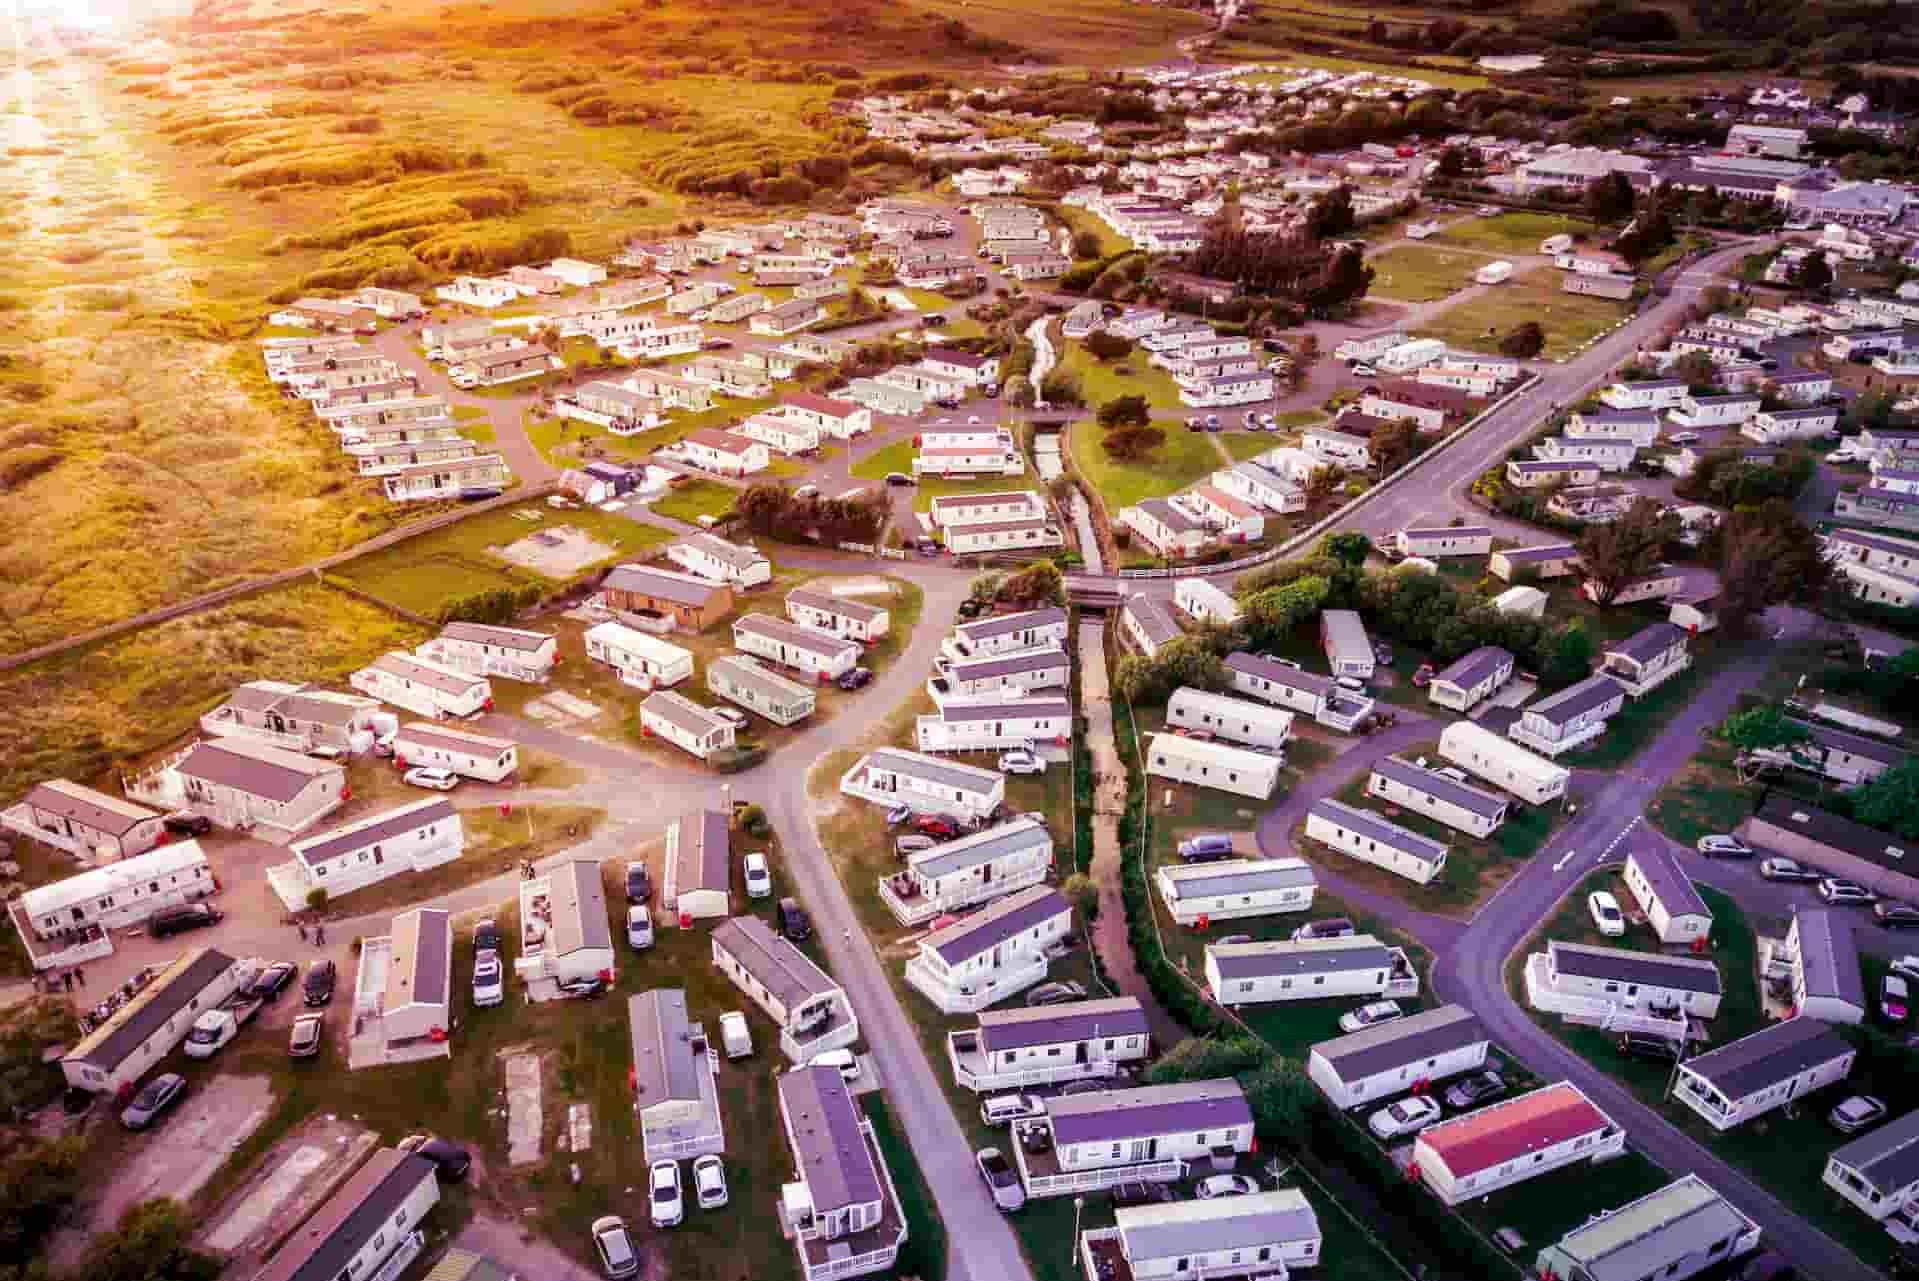 bird eye view of holiday park in the UK with sunsetting in the distance